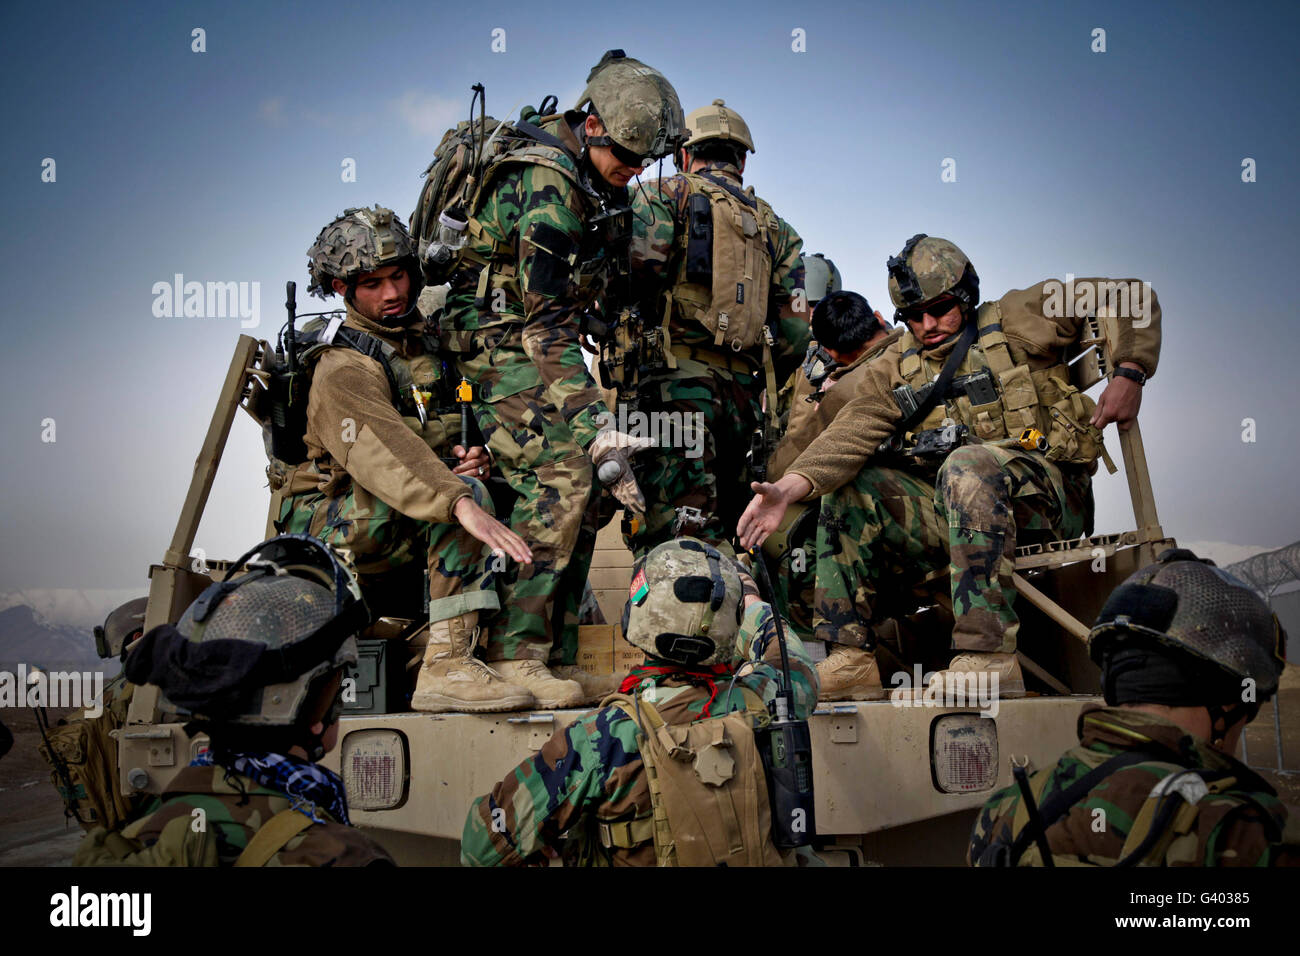 Afghan soldiers give a hand up to a fellow soldier. Stock Photo